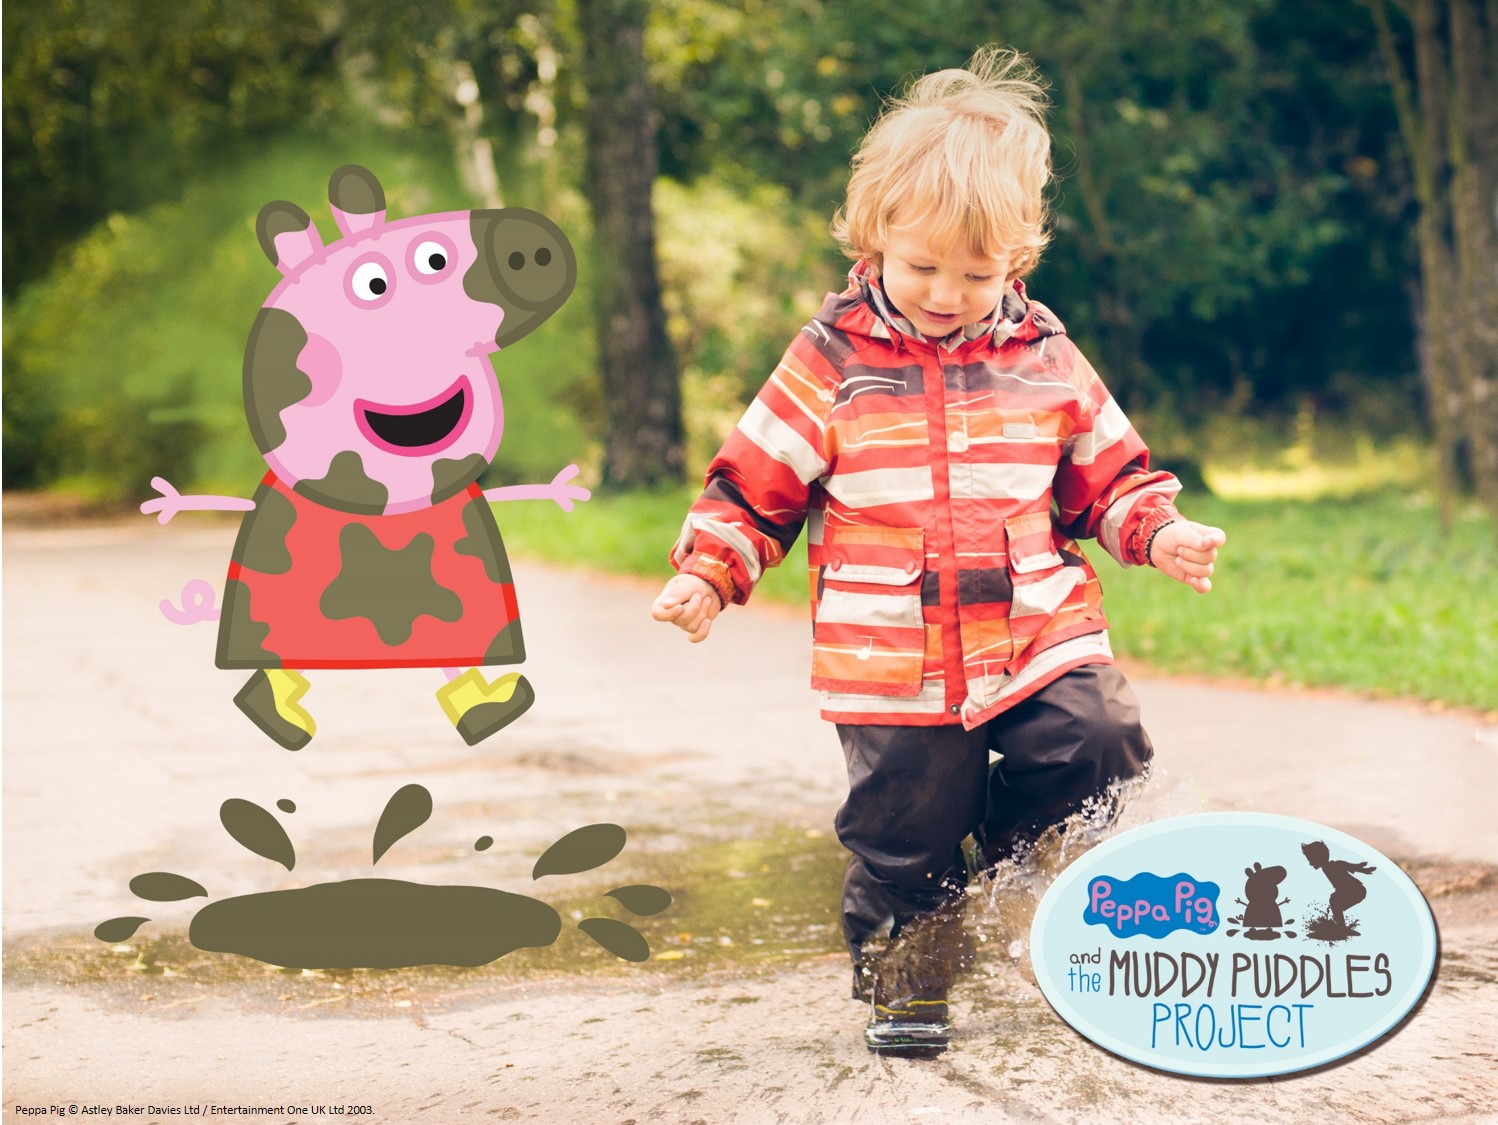 April Showers Bring Muddy Puddles! 